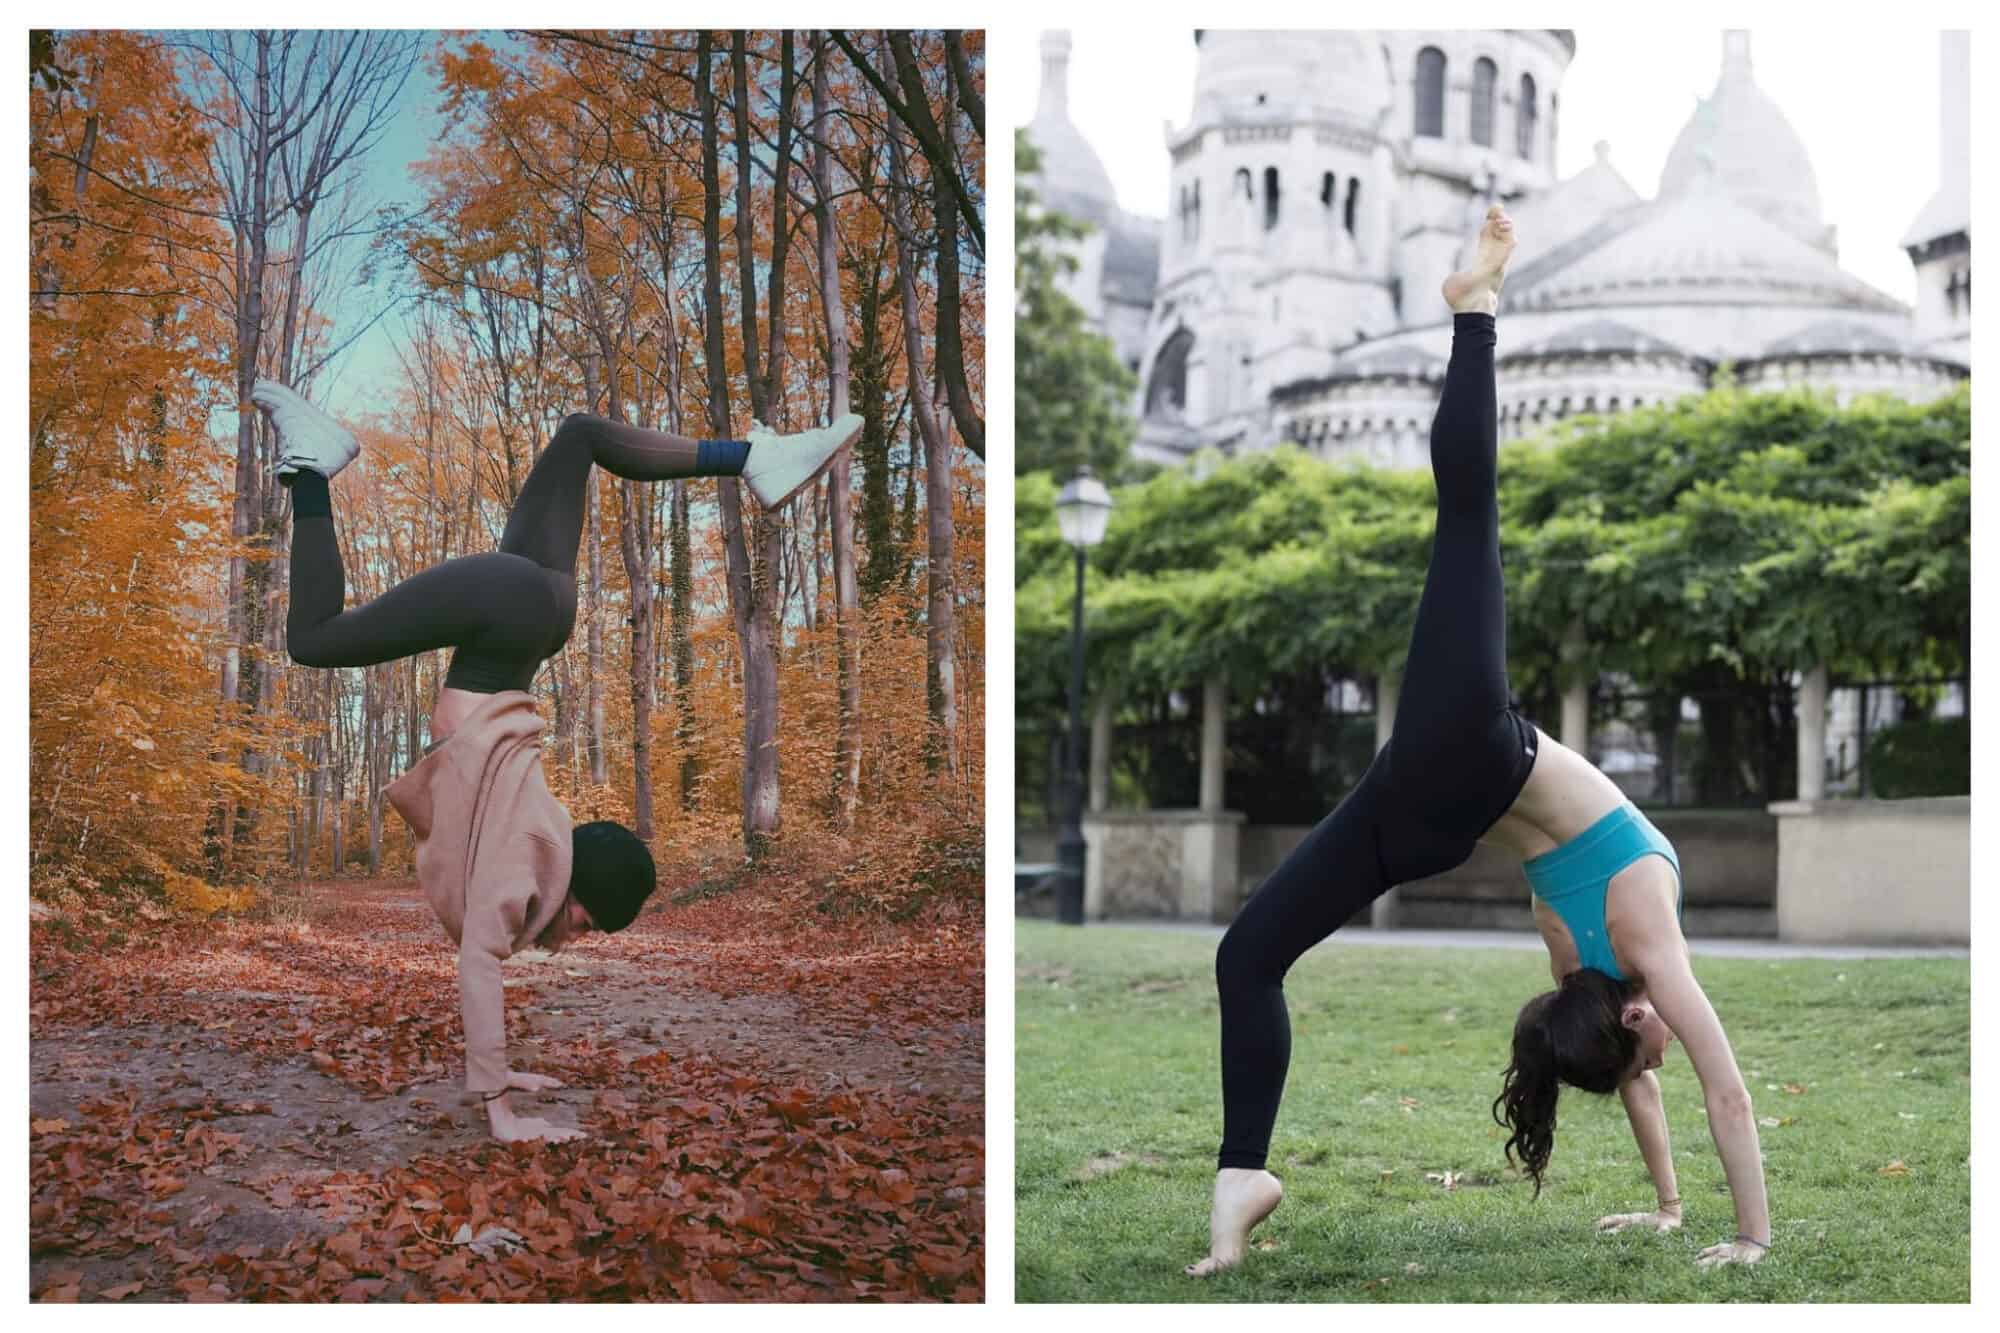 Left: a woman does a handstand in a forest during the autumn.
Right: a woman does a backbend with one leg sticking up vertically in the ai, in front of the Sacre Coeur.